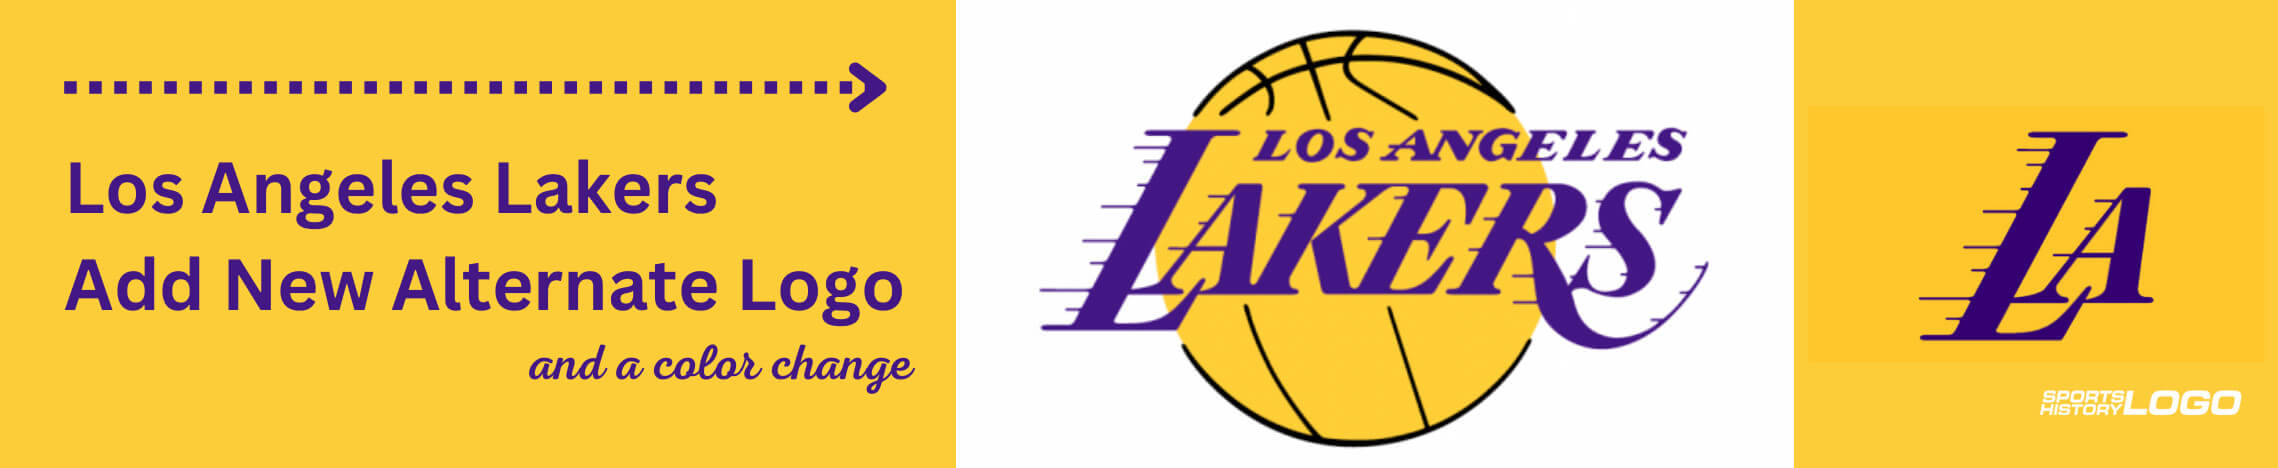 Los Angeles Lakers unveil new jersey design, Sports